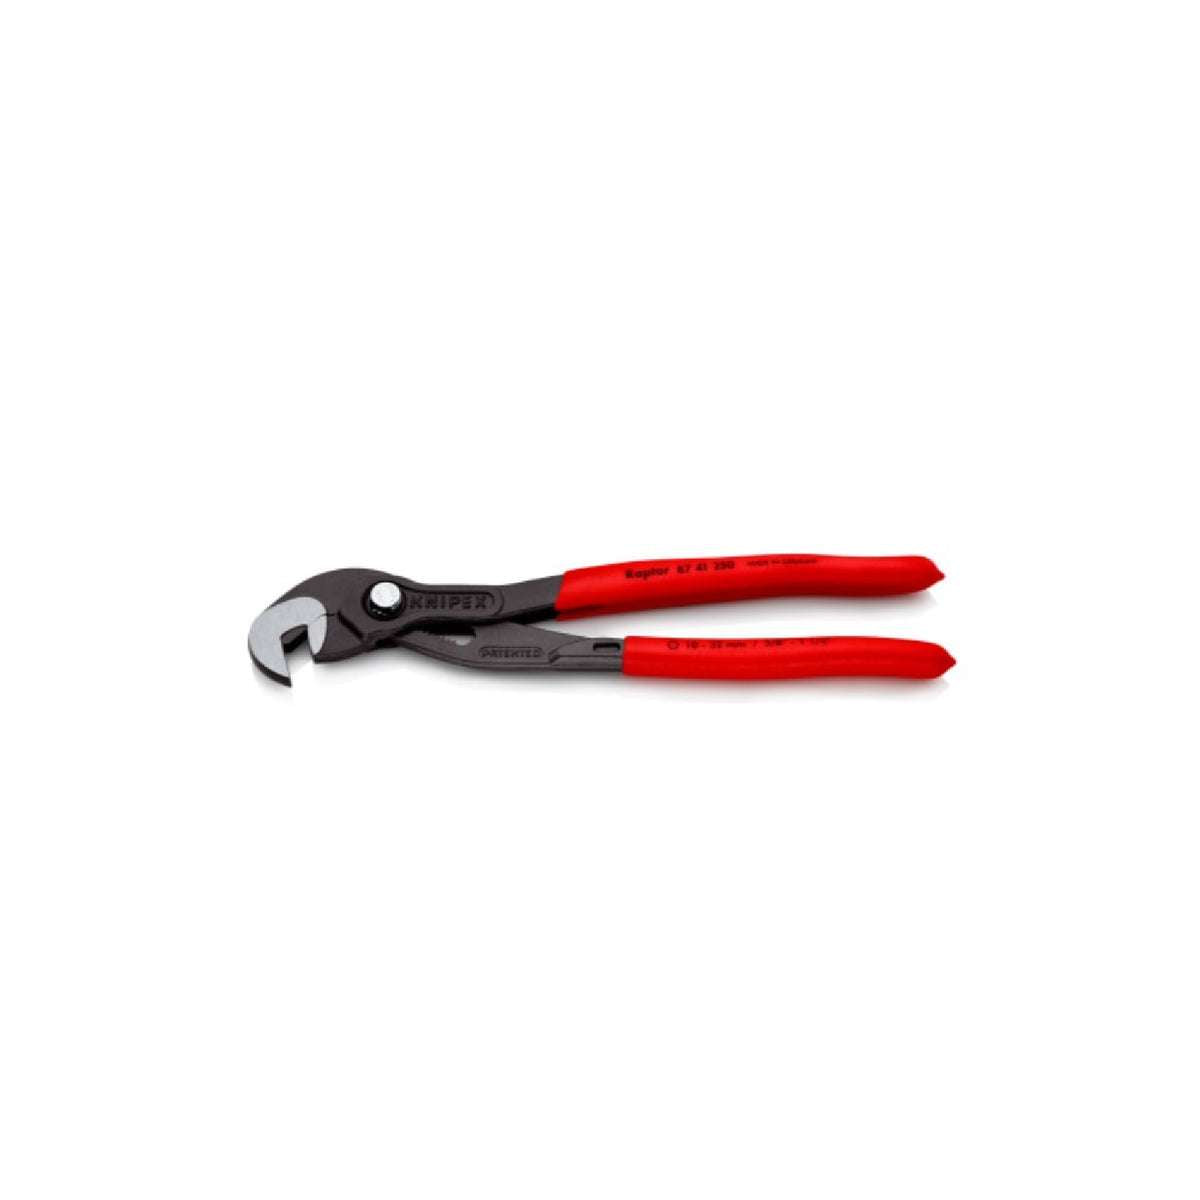 Tucano Wrench Pliers 250mm - Knipex